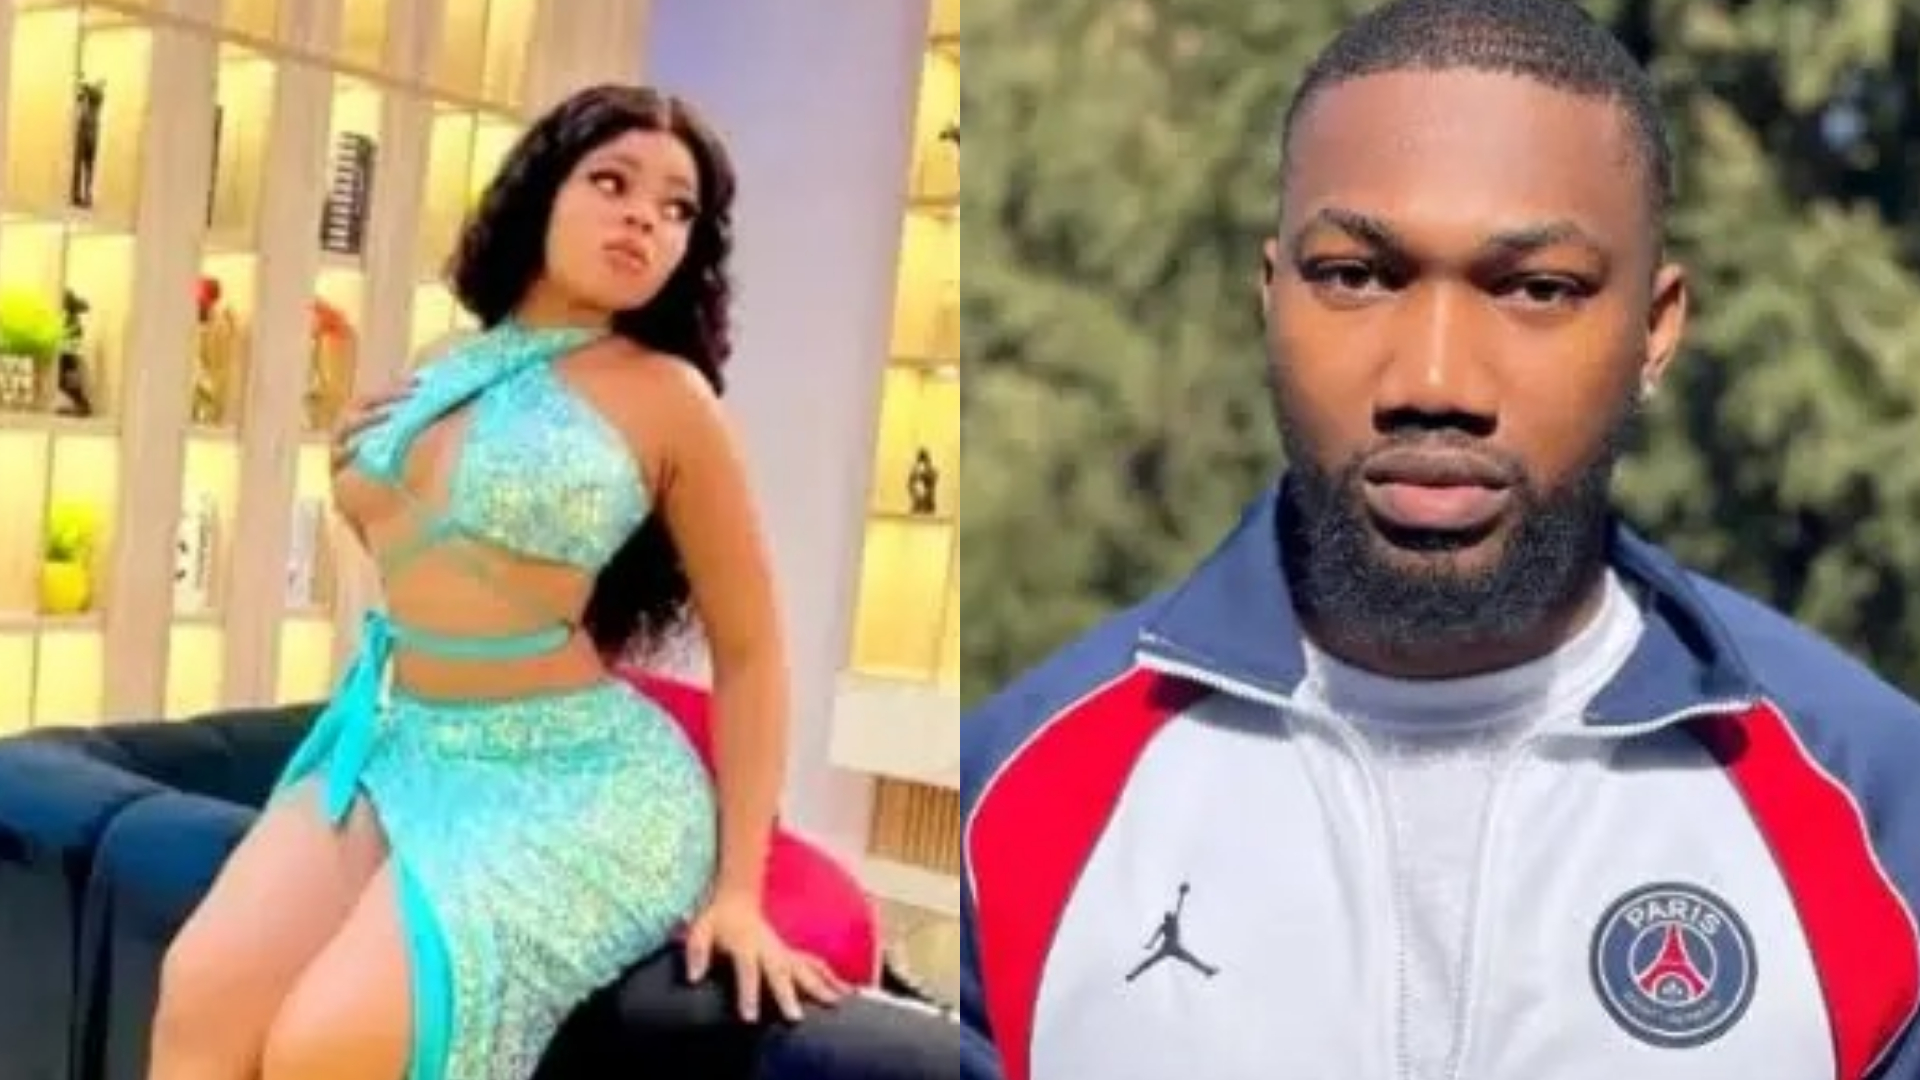 “Deji sleeps with older women to survive” – Chichi drags former lover